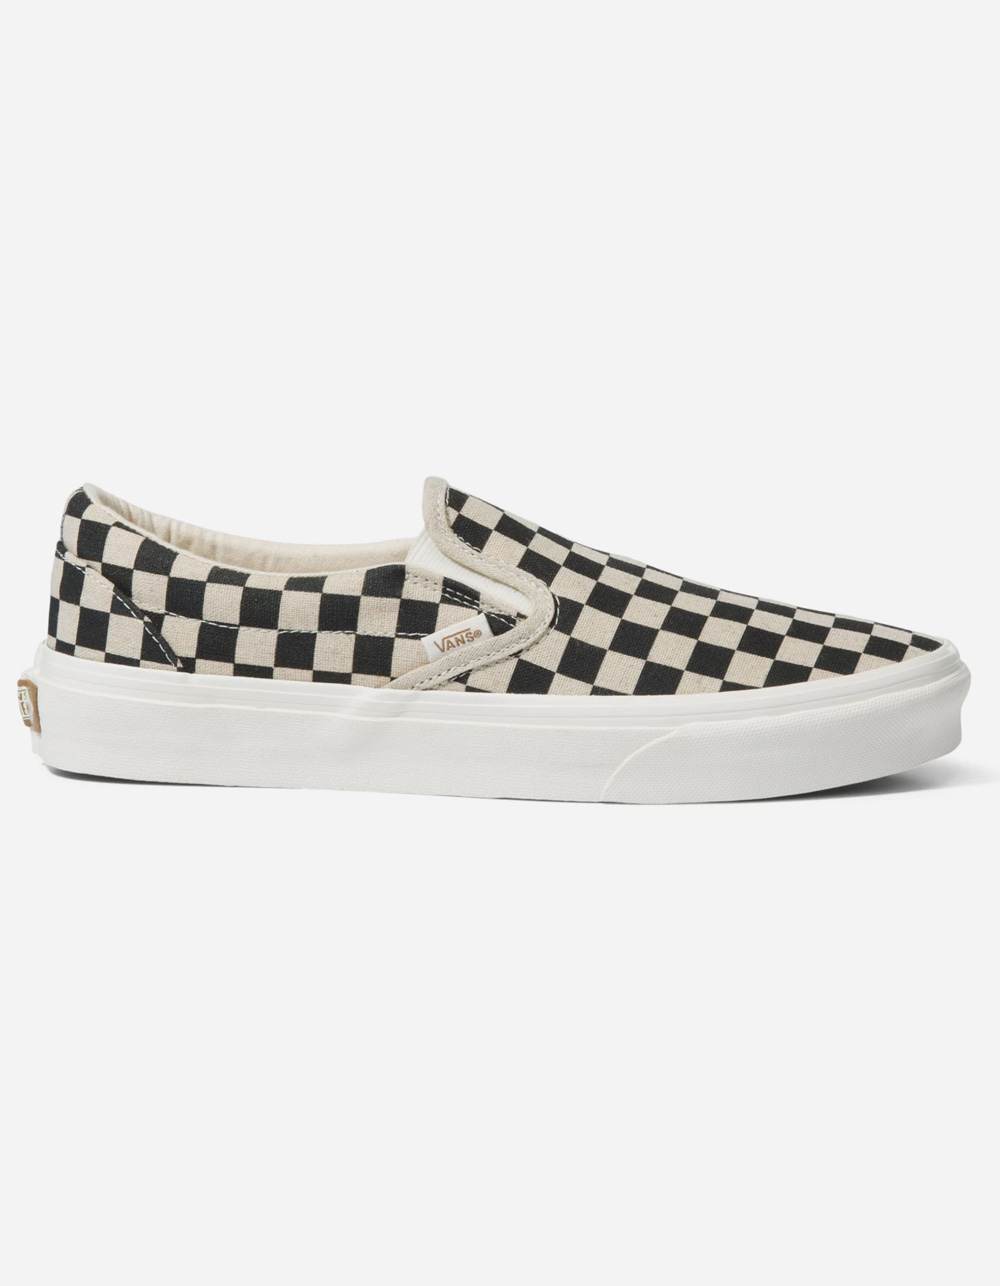 VANS Classic Slip-On Shoes - BLK YLW FADE | Tillys